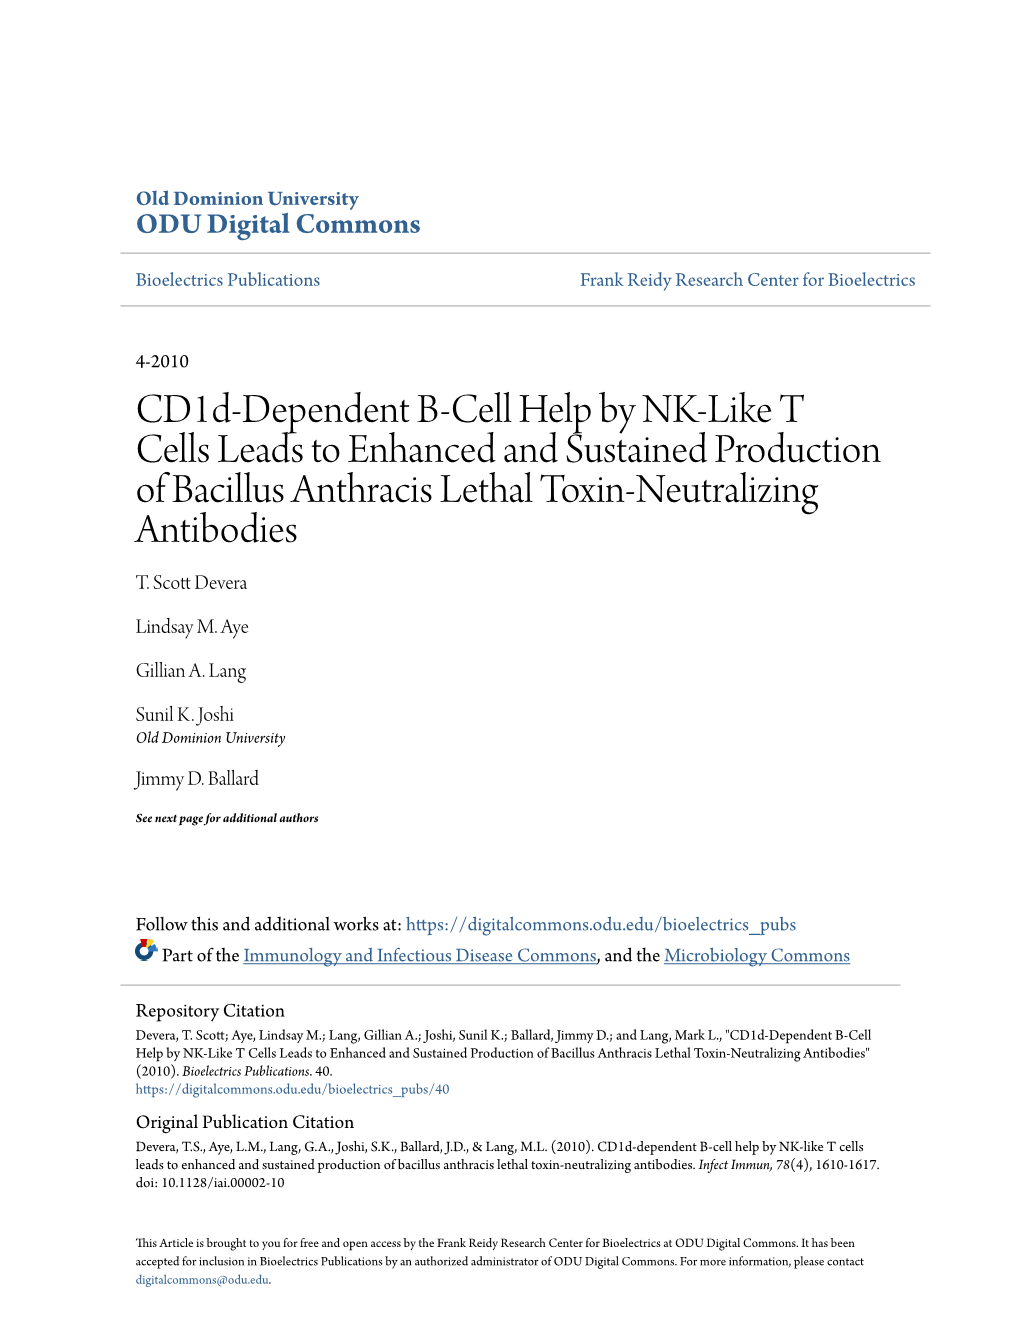 Cd1d-Dependent B-Cell Help by NK-Like T Cells Leads to Enhanced and Sustained Production of Bacillus Anthracis Lethal Toxin-Neutralizing Antibodies T